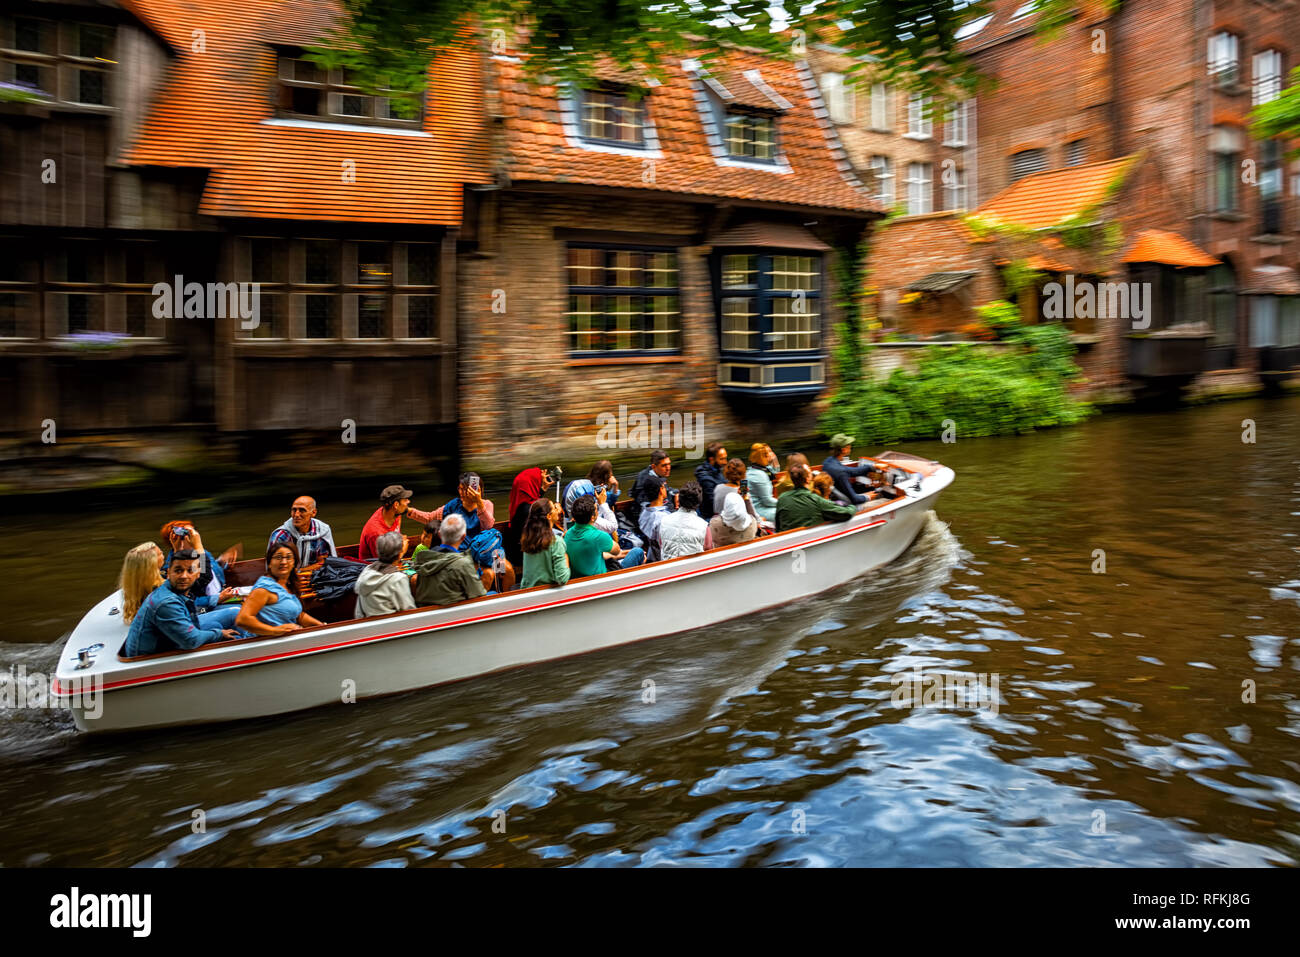 Bruges, Belgium - July 29: Canal boat tour in the Old Town of Bruges is a popular sightseeing activity. Background motion blur effect. Bruges, Belgium Stock Photo